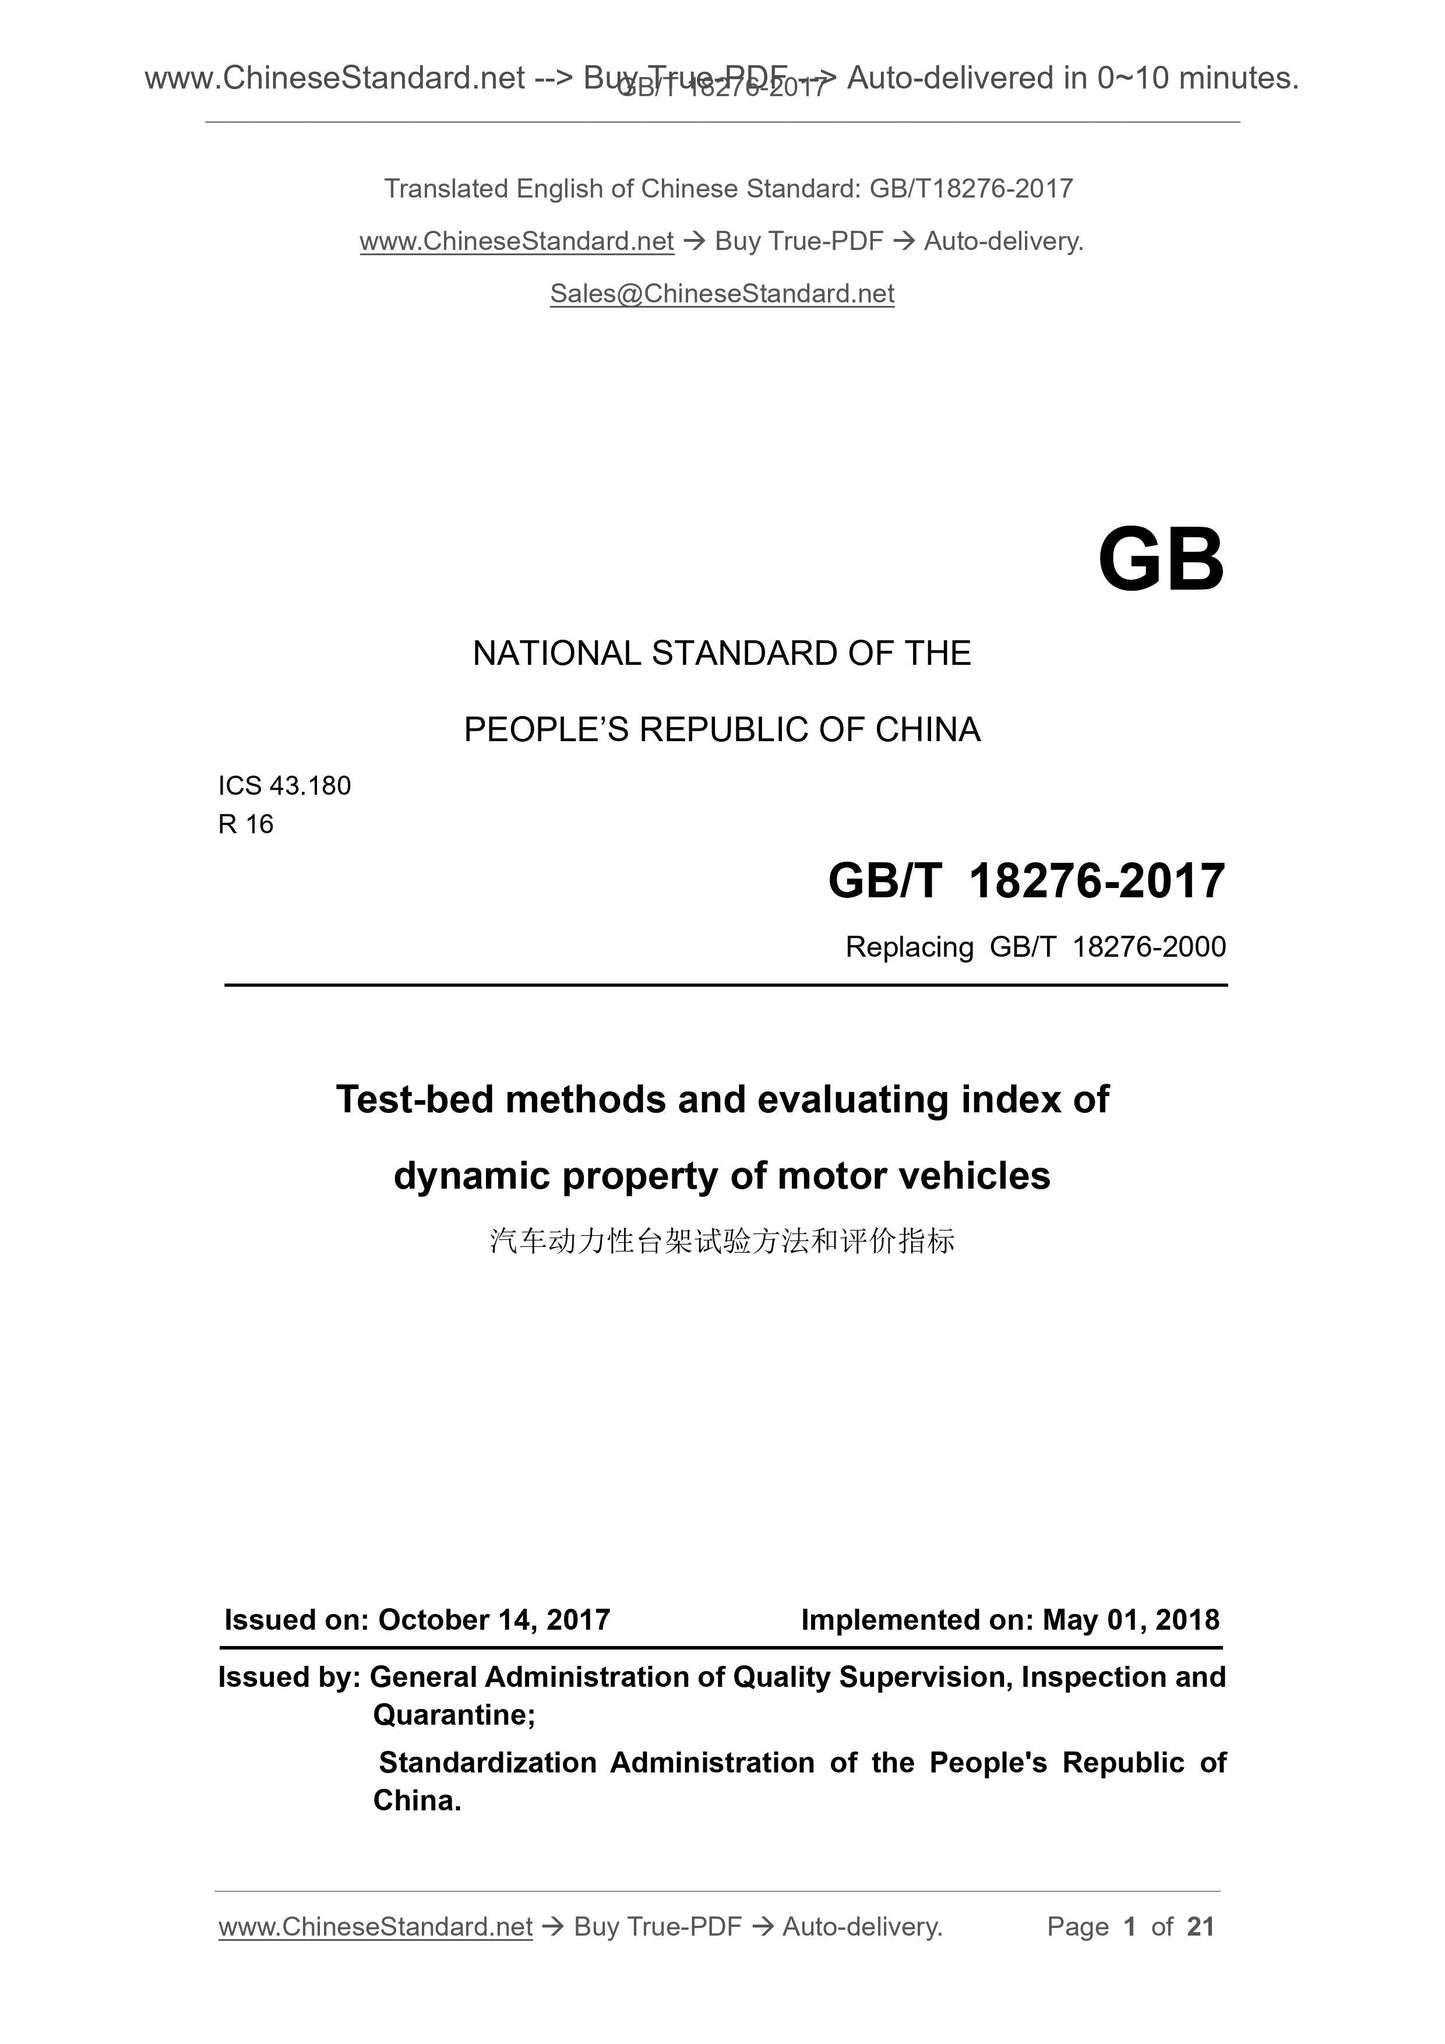 GB/T 18276-2017 Page 1